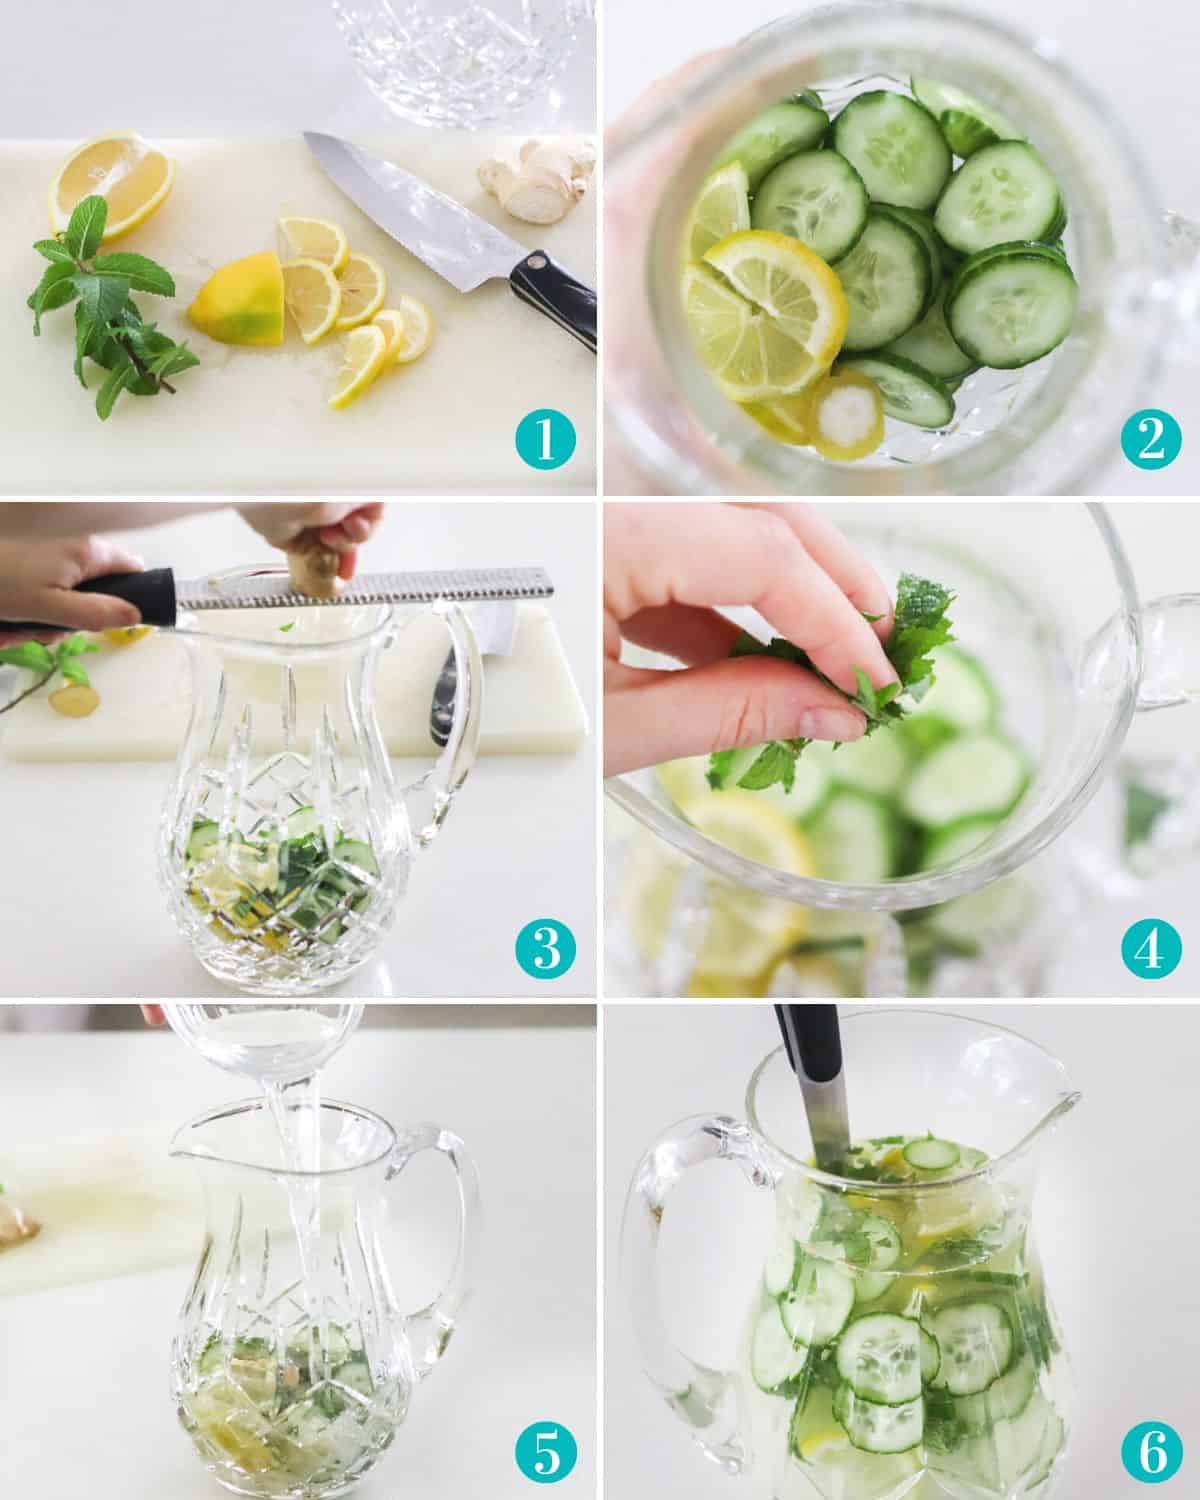 collage of six photos with cutting board and lemon, ginger, cucumbers, and mint; crystal pitcher full of sliced cucumbers and lemon; hand grating ginger into pitcher; hand sprinkling fresh mint into pitcher; water pouring into pitcher; spoon stirring together cucumber, lemon, mint, and ginger water.